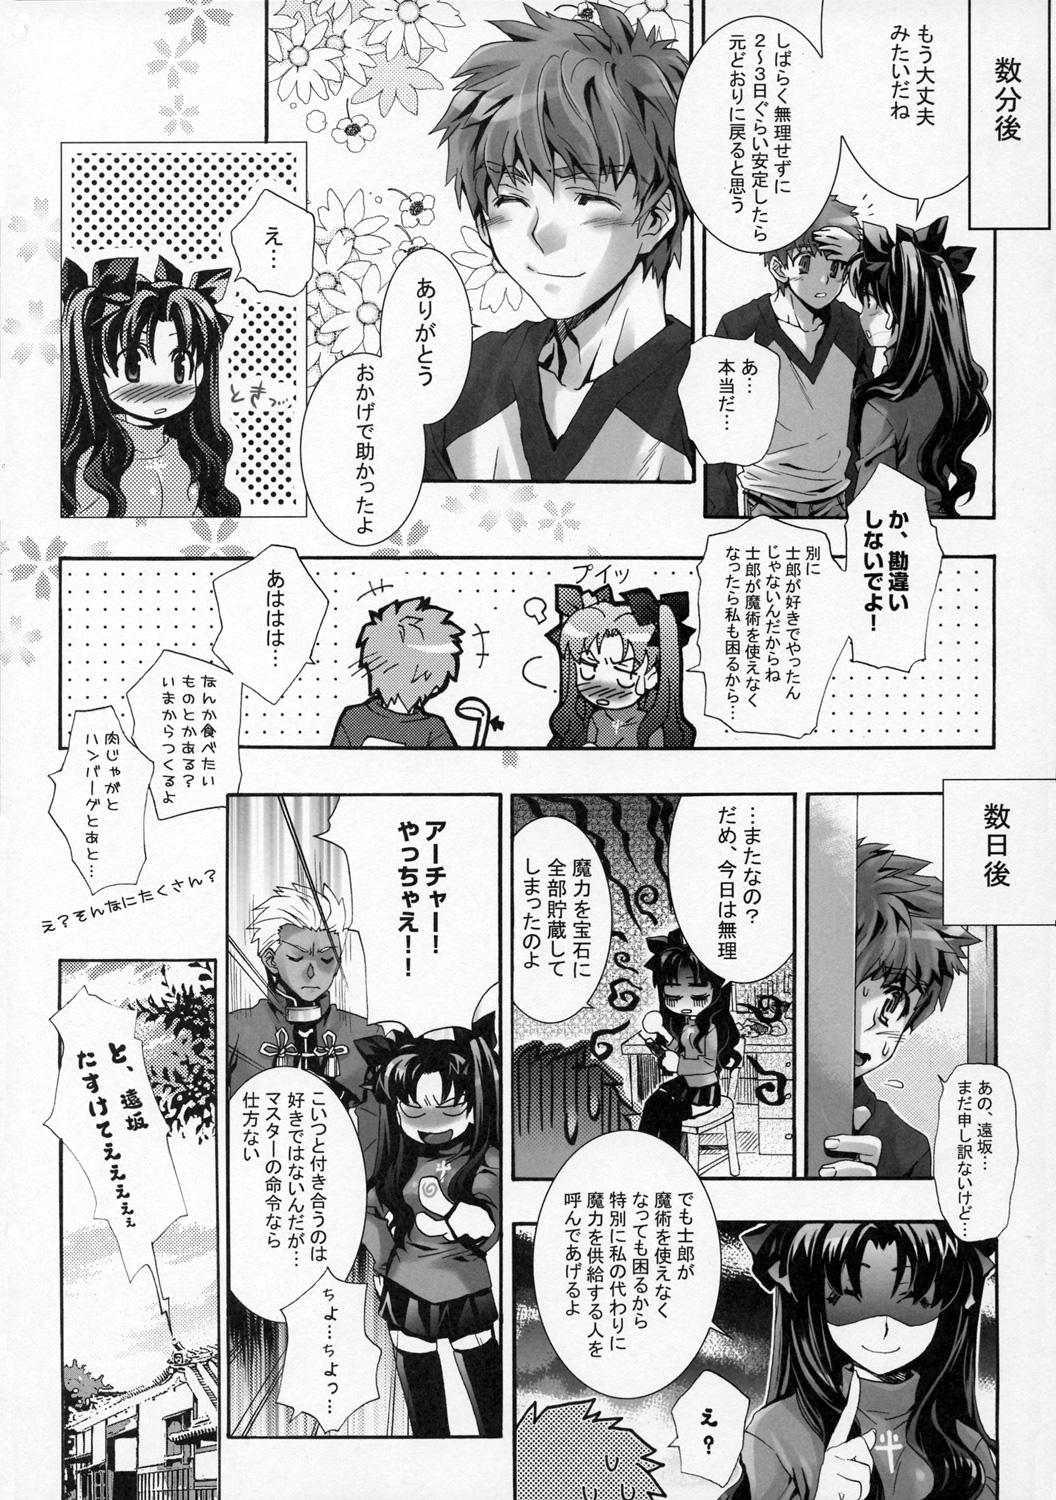 Young Tits Mittsubotan de kyun! - Fate stay night Toheart2 Public Sex - Page 12